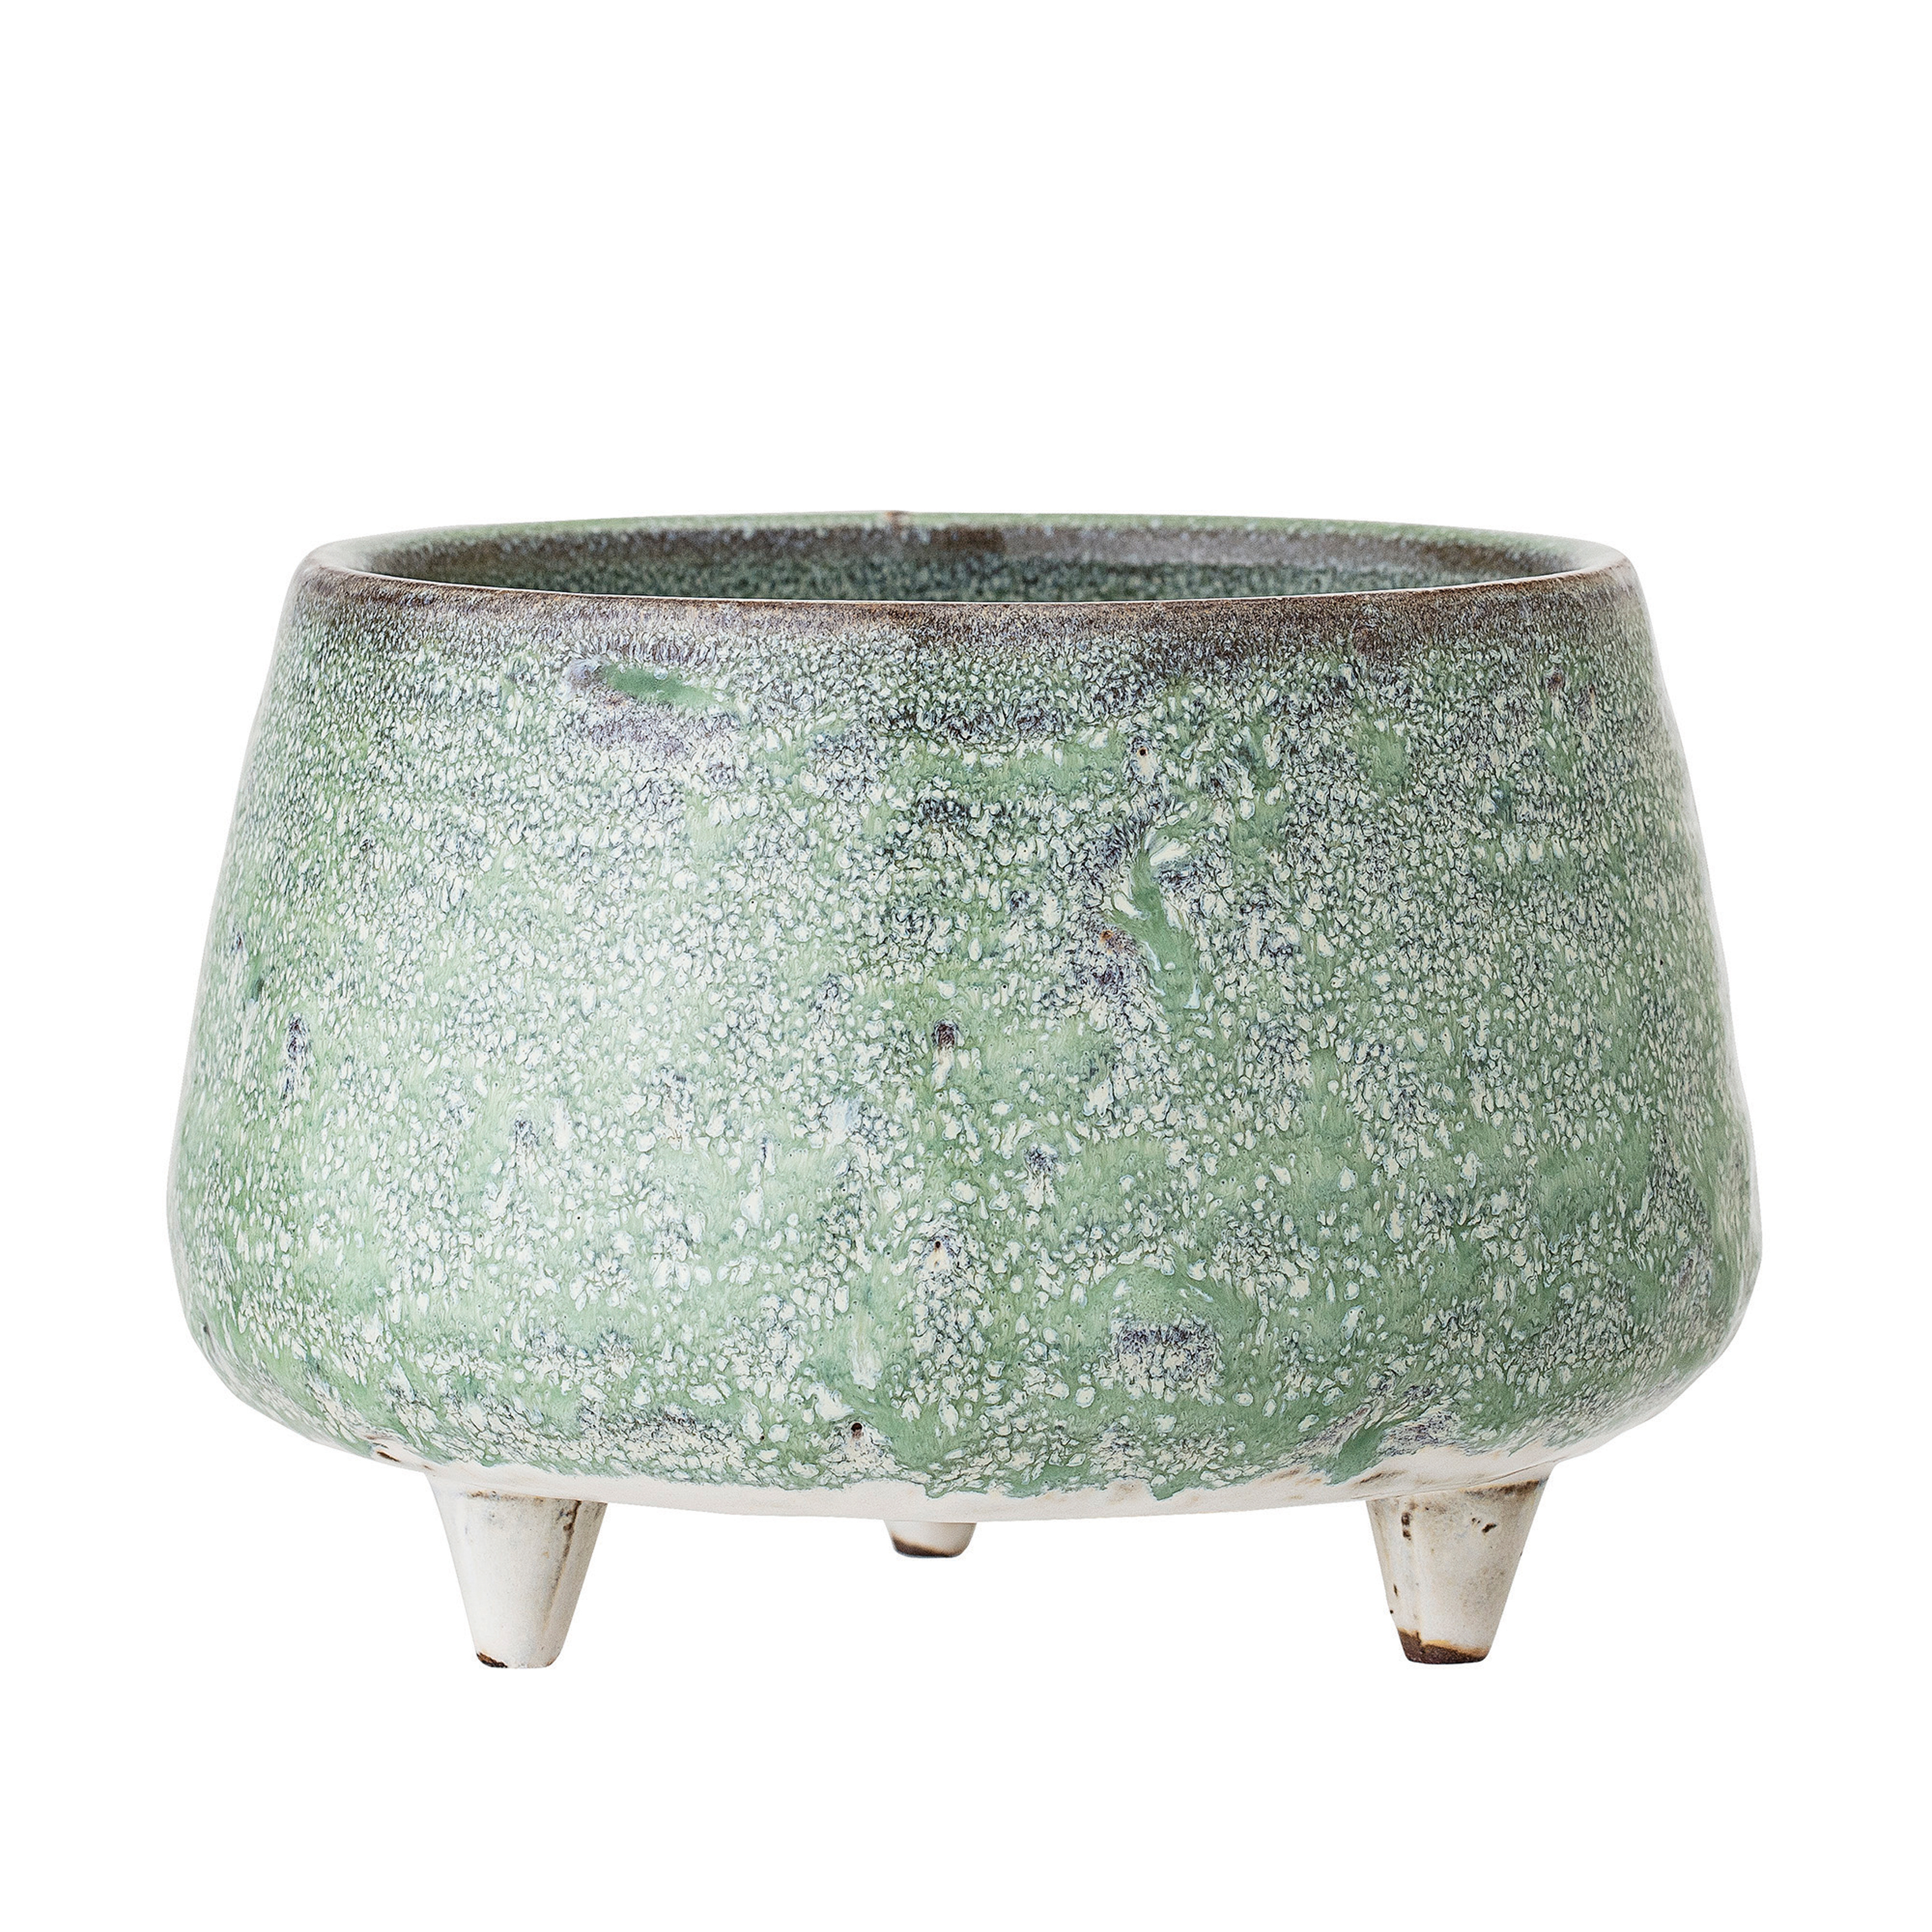 Green Stoneware Footed Planter with Reactive Glaze Finish (Each one will vary) - Moss & Wilder